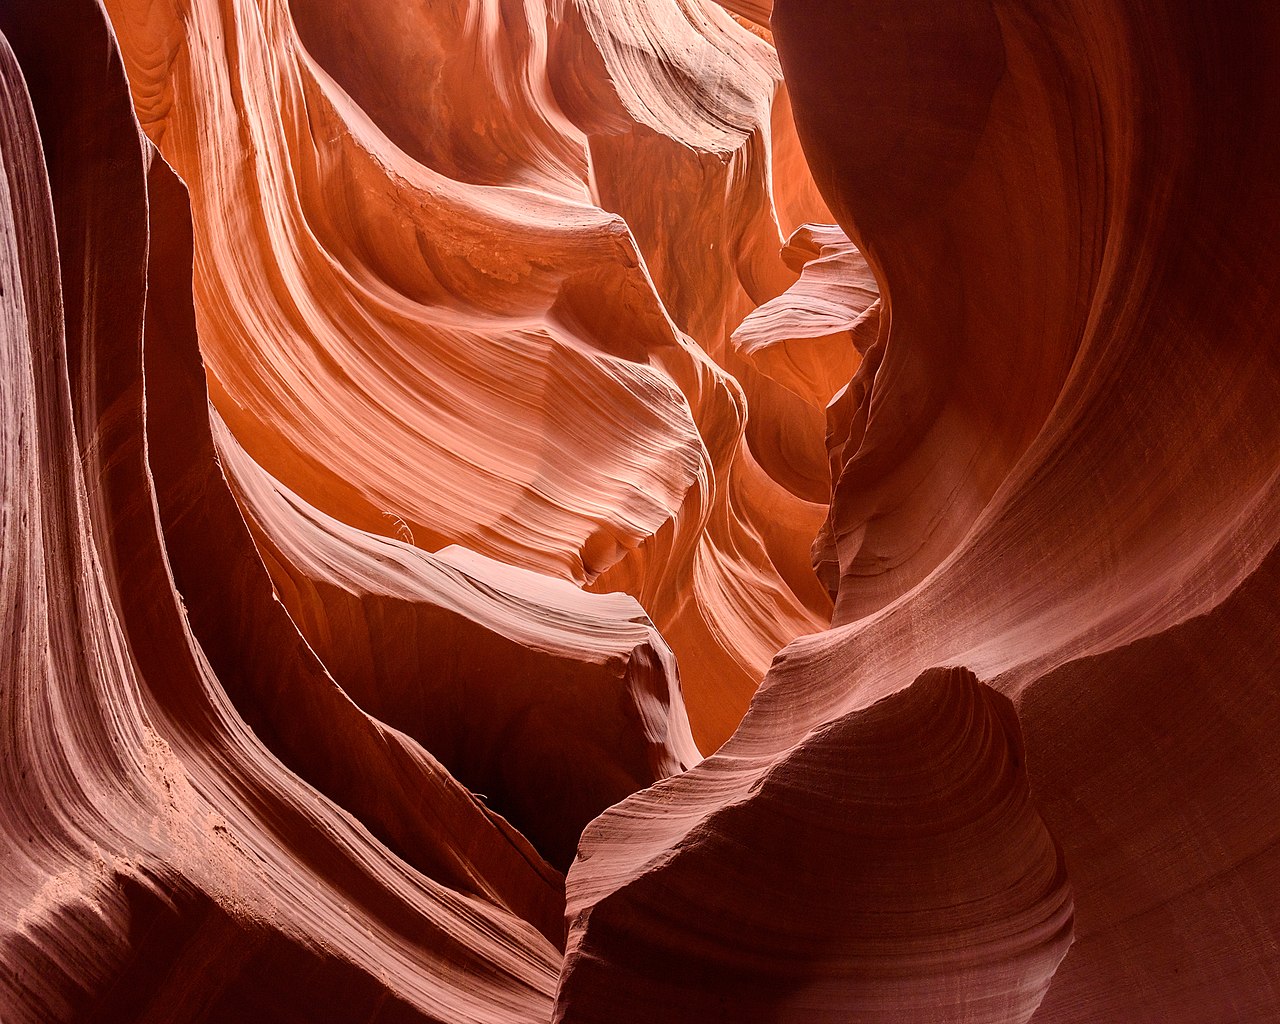 In the words of one visitor, Antelope Canyon is truly the "Eighth Wonder of the World," an indication of the awe-inspiring beauty of the American Southwest. This geological jewel is exquisite, for within its plain exterior lies a world of wonder waiting to be discovered.